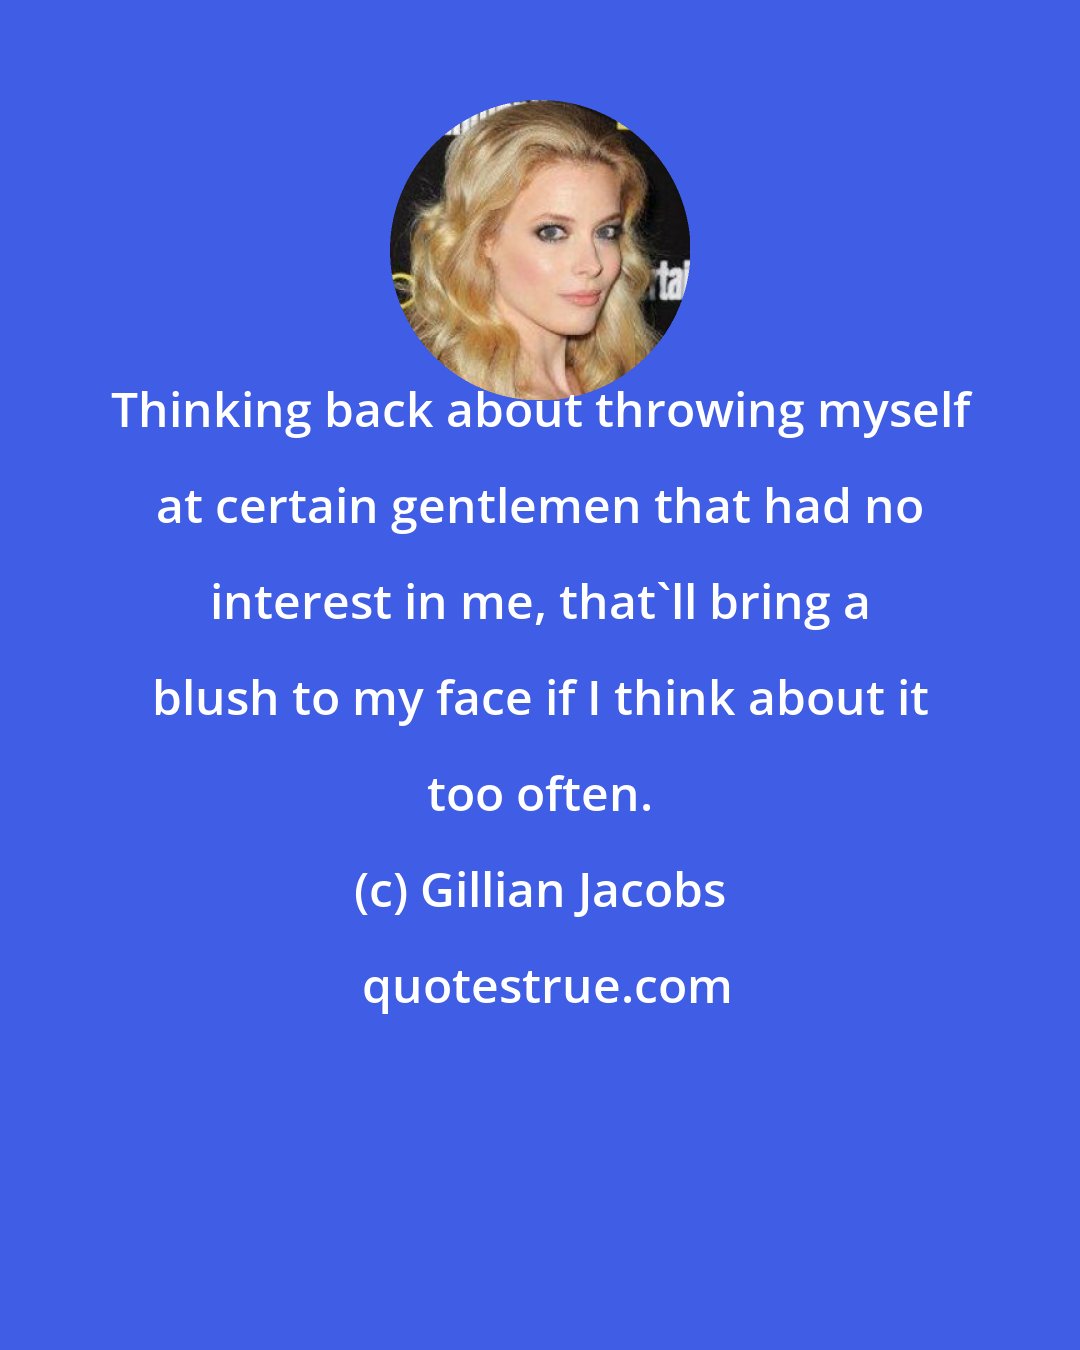 Gillian Jacobs: Thinking back about throwing myself at certain gentlemen that had no interest in me, that'll bring a blush to my face if I think about it too often.